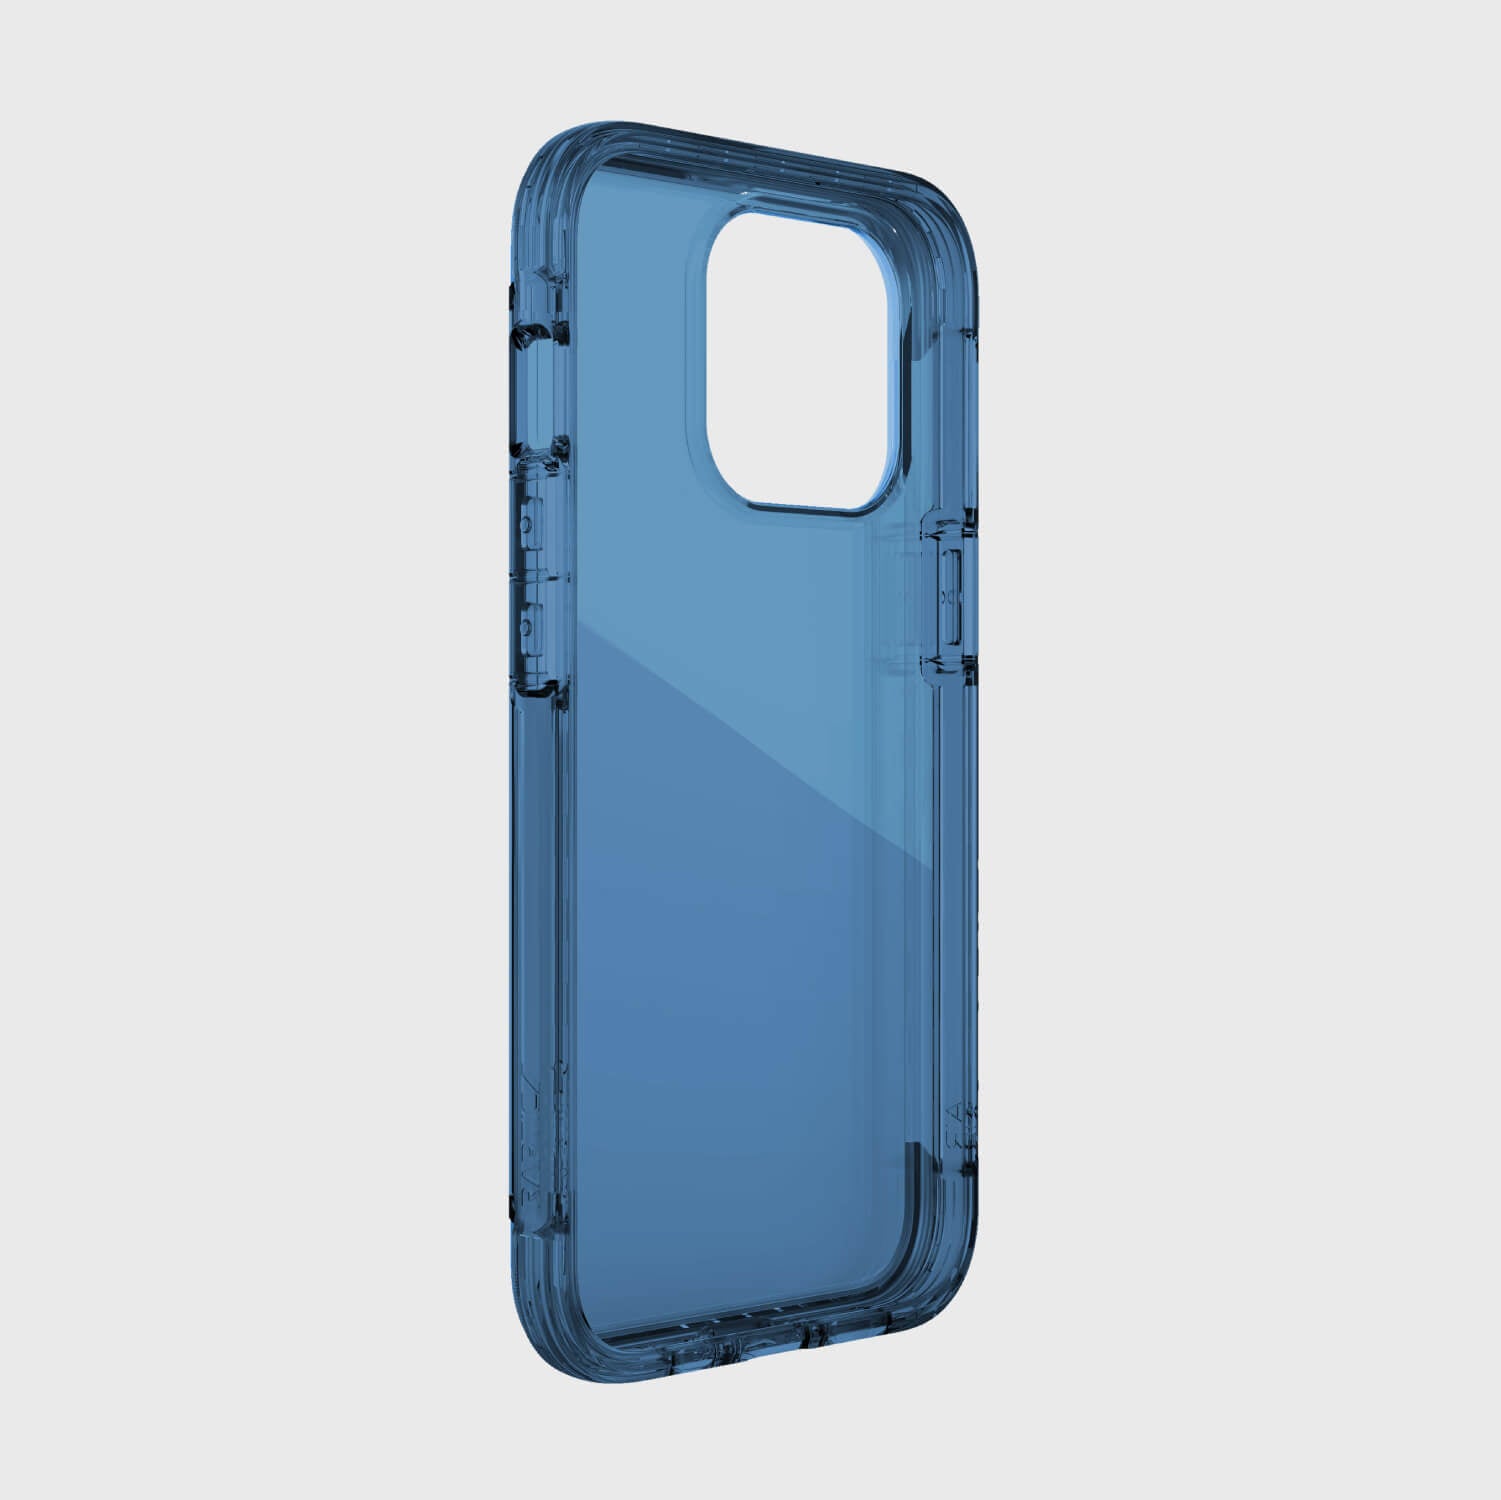 The drop-proof back view of a blue Raptic iPhone 13 Pro Case - AIR, with 13-foot drop protection and wireless charging compatibility.